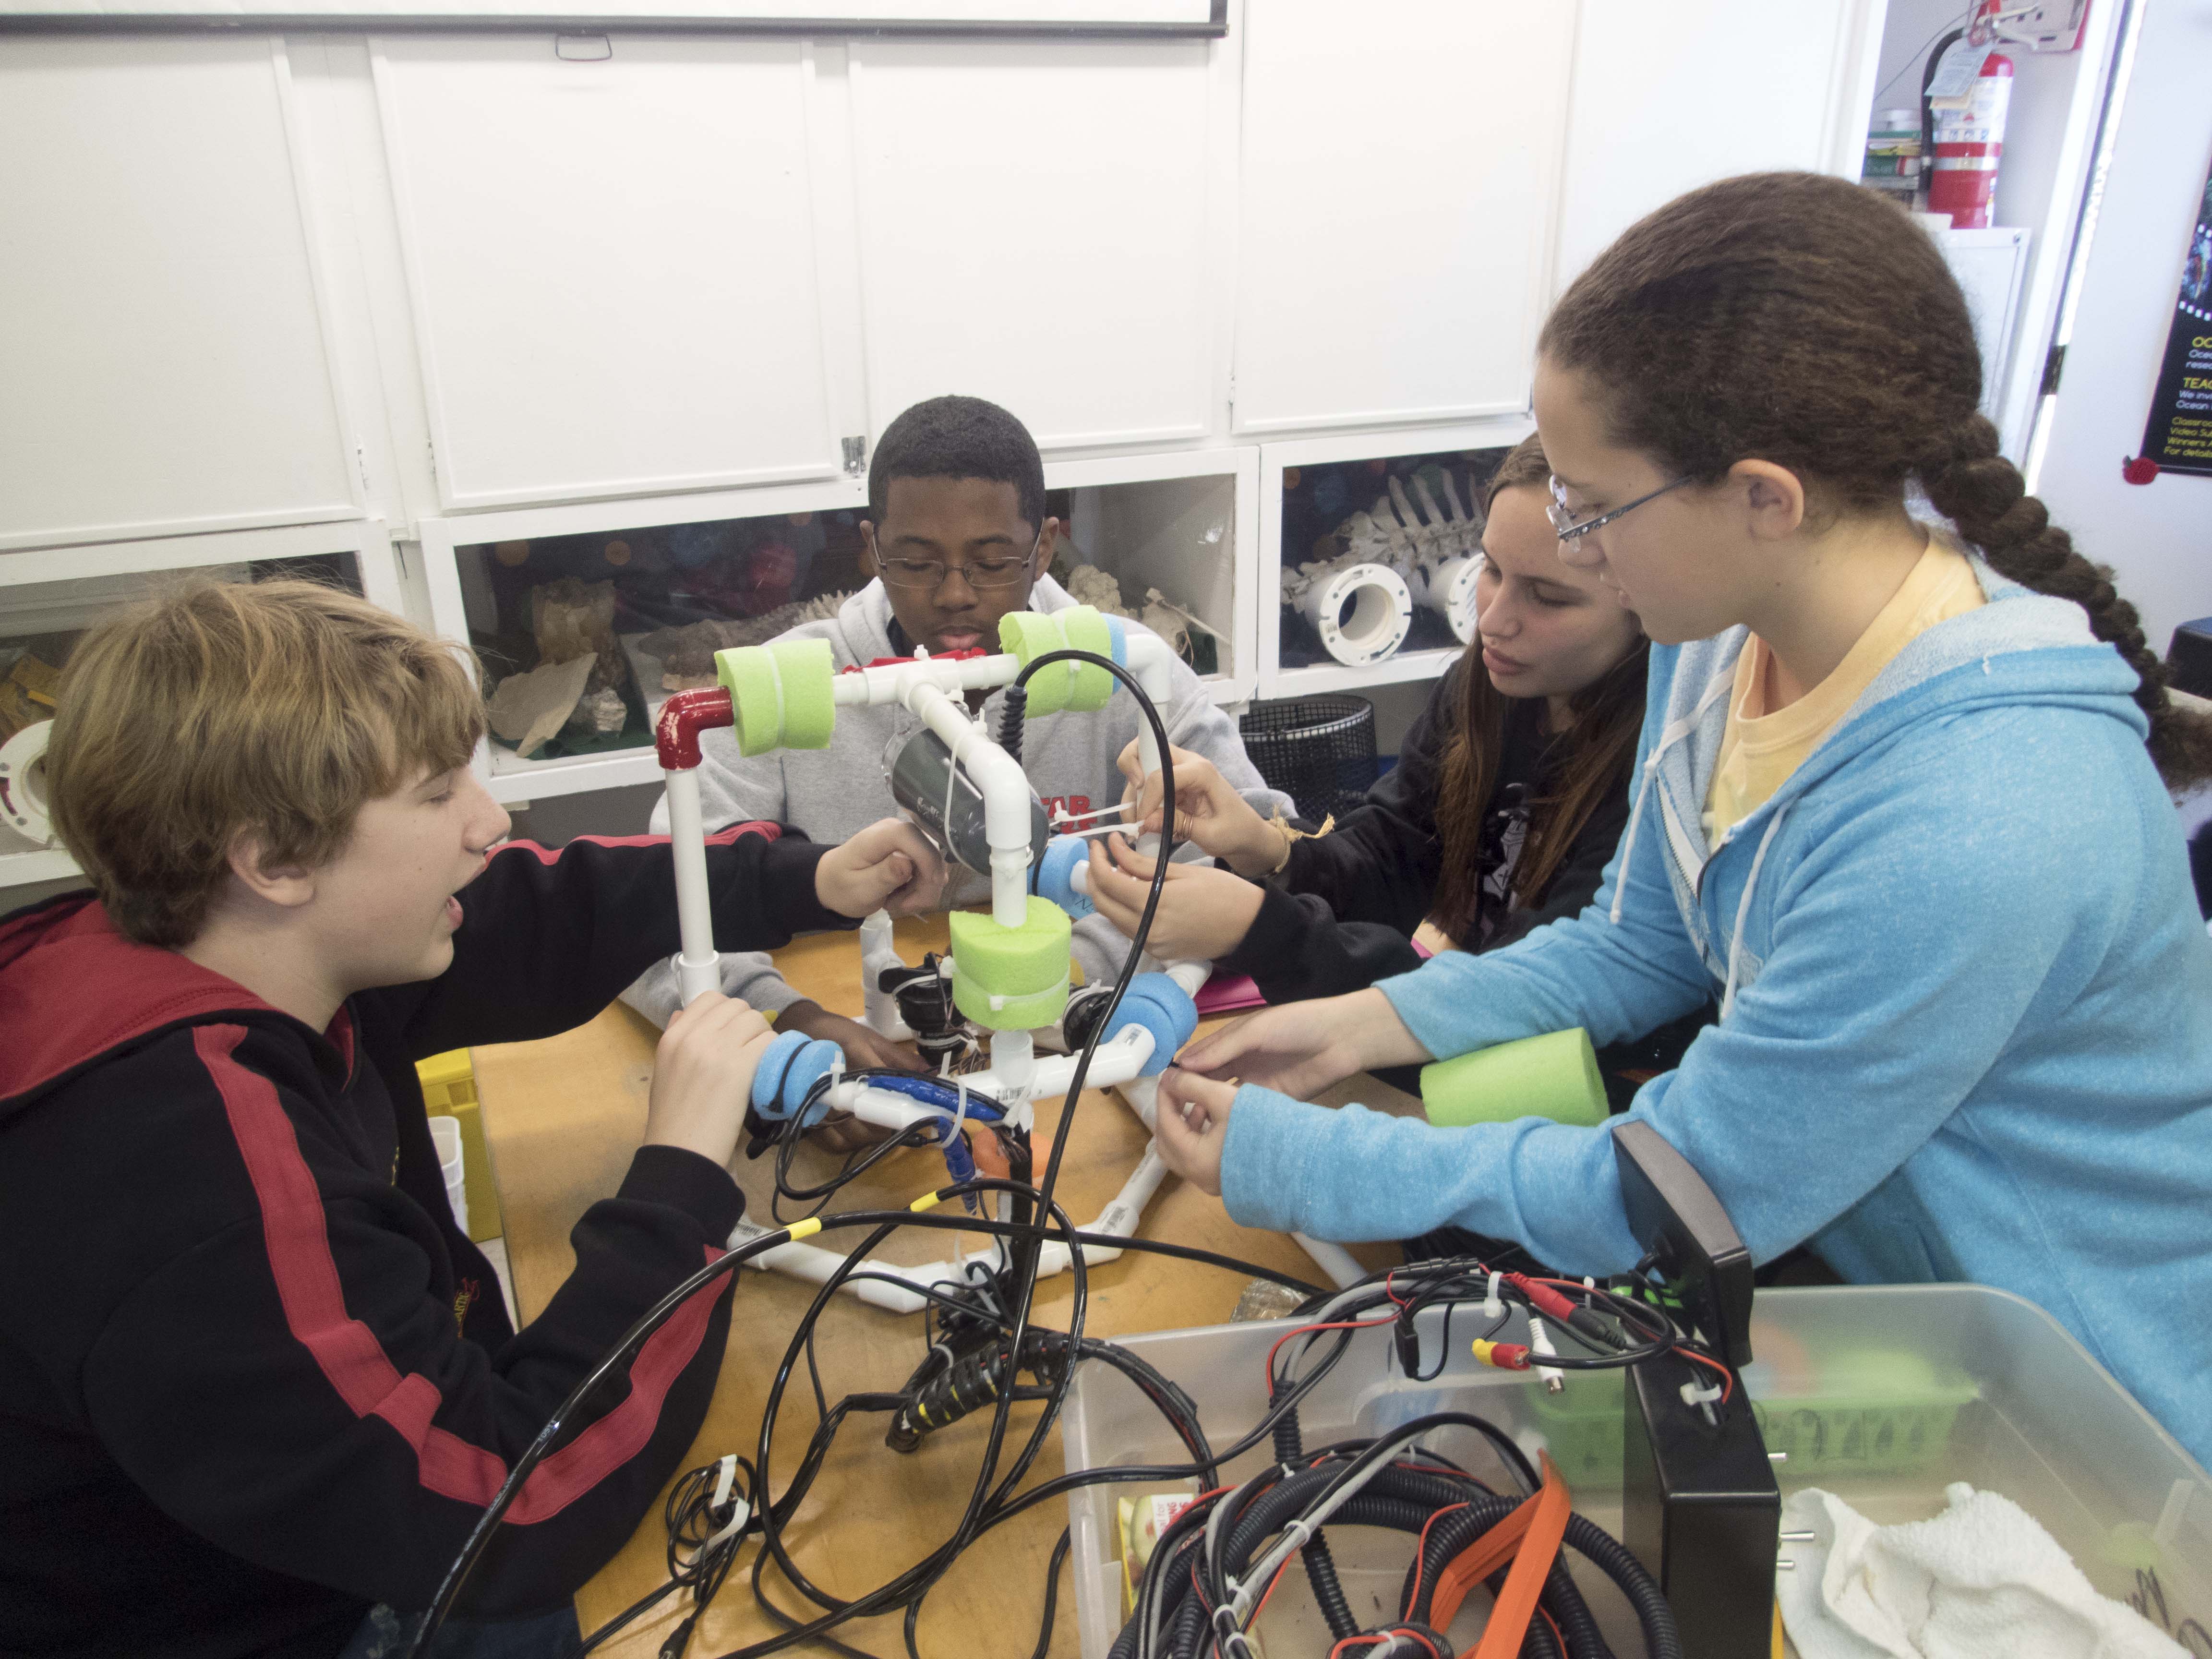 Building remotely operated vehicles (ROVs) integrates technology and engineering into the ocean science classroom.